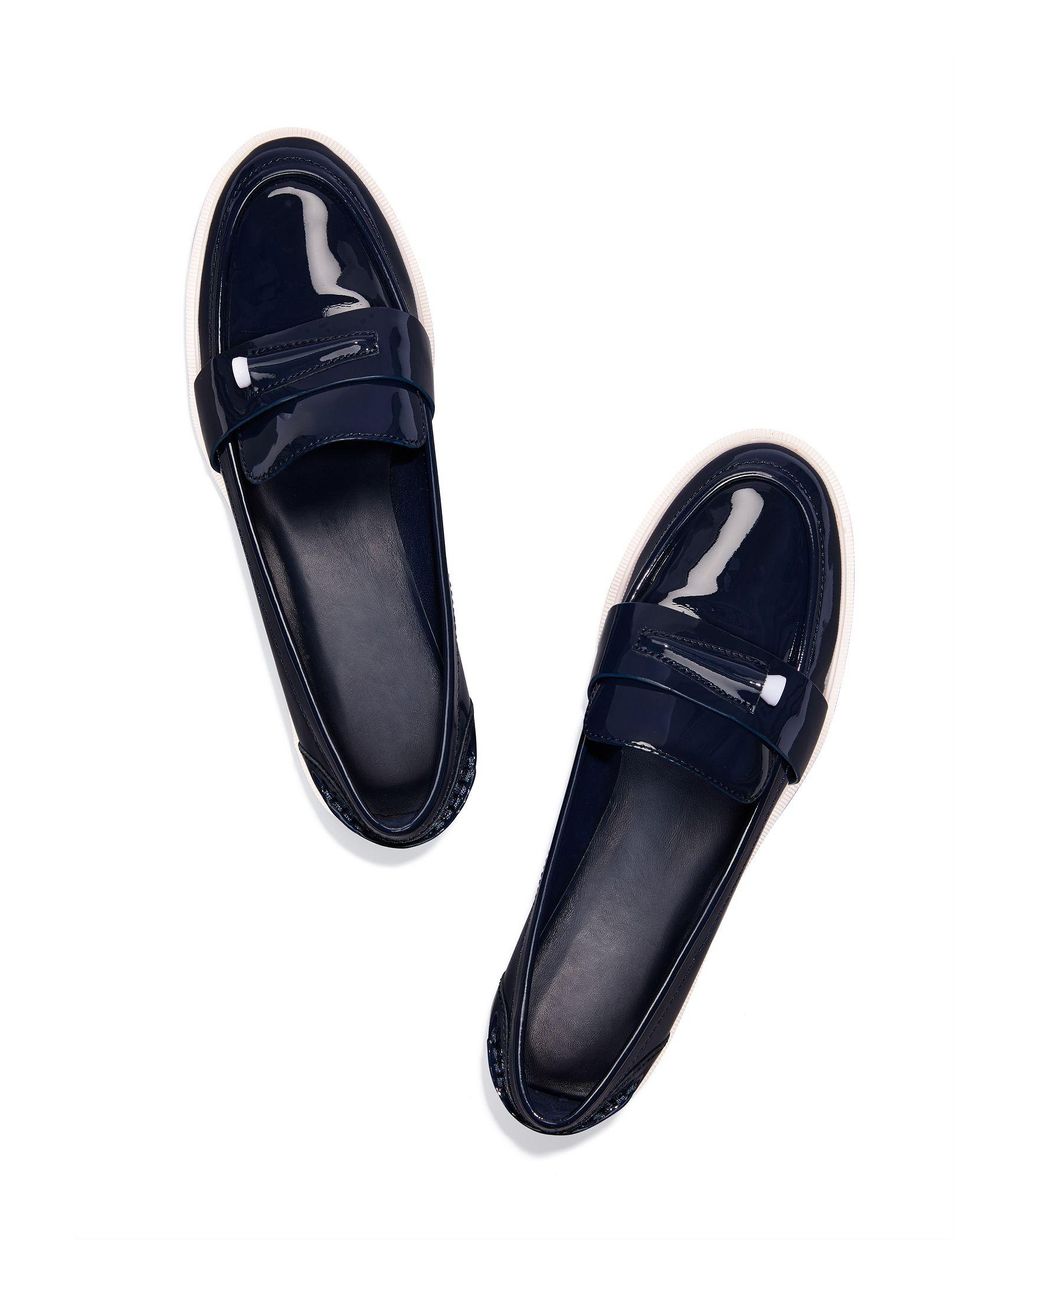 Tory Sport Leather Pocket-tee Golf Loafers in Navy Blue (Blue) - Lyst